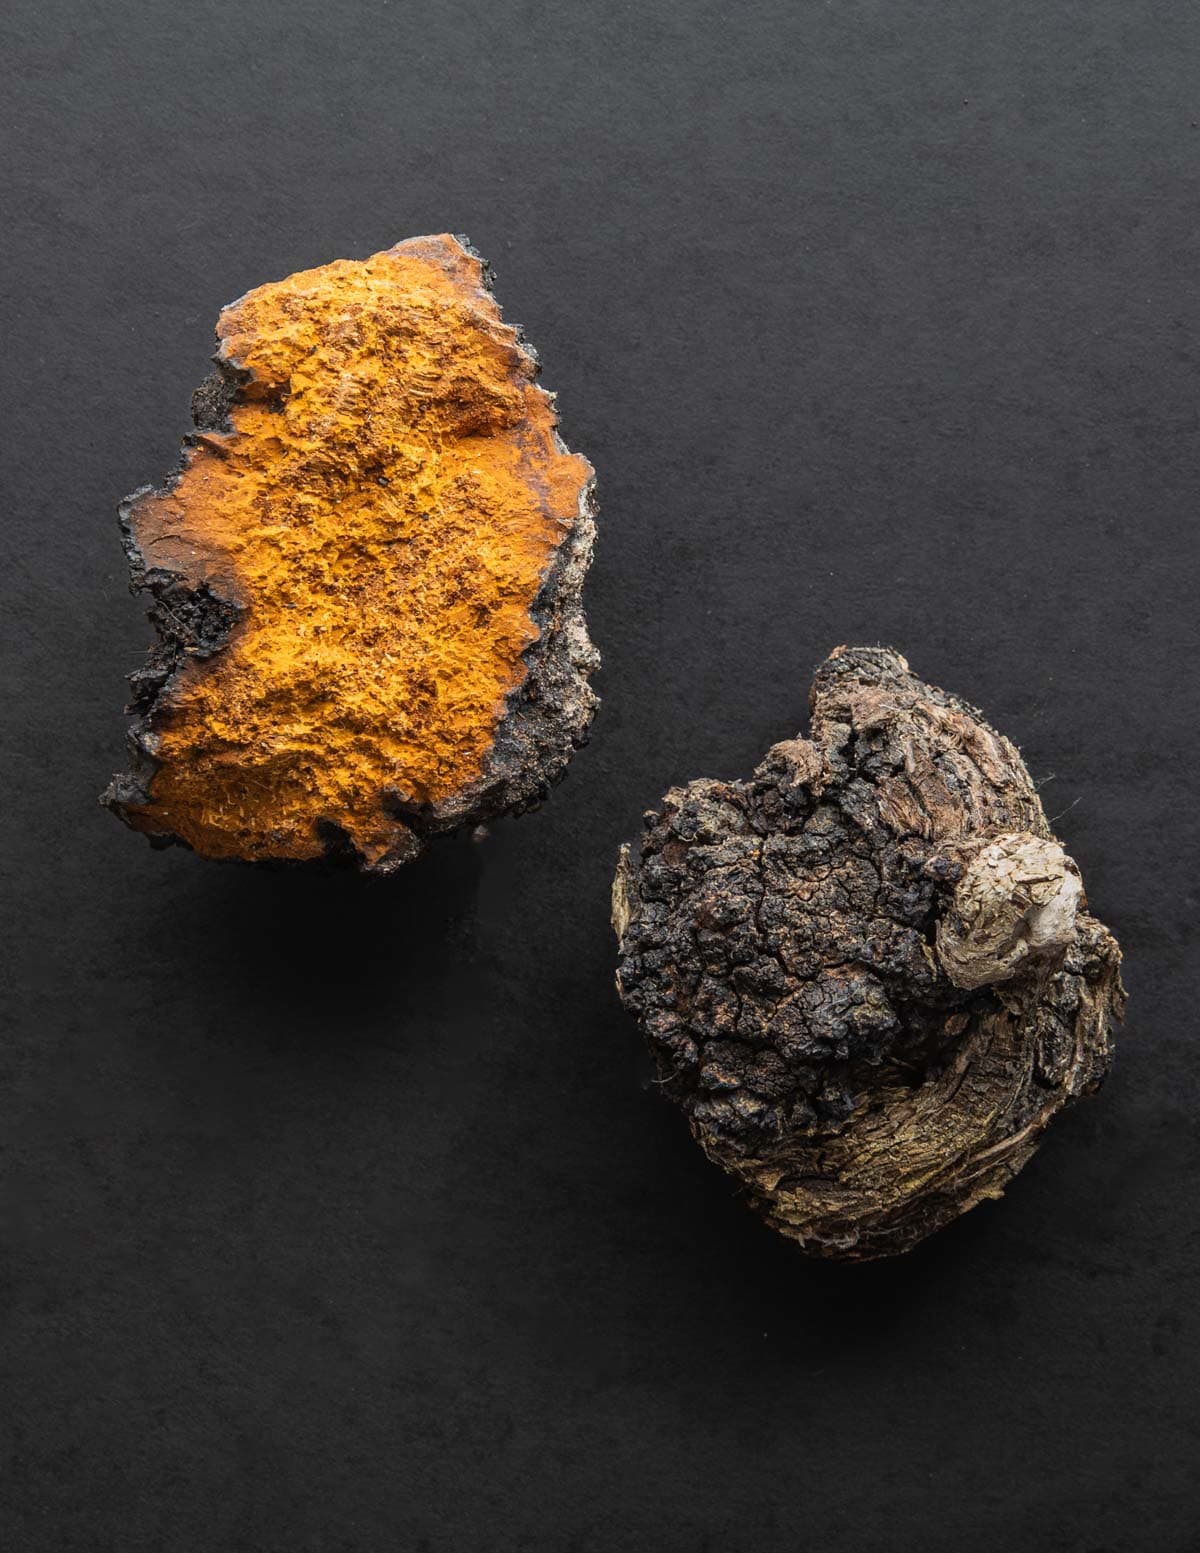 two pieces of fresh chaga mushroom on a black background showing different characteristics. 